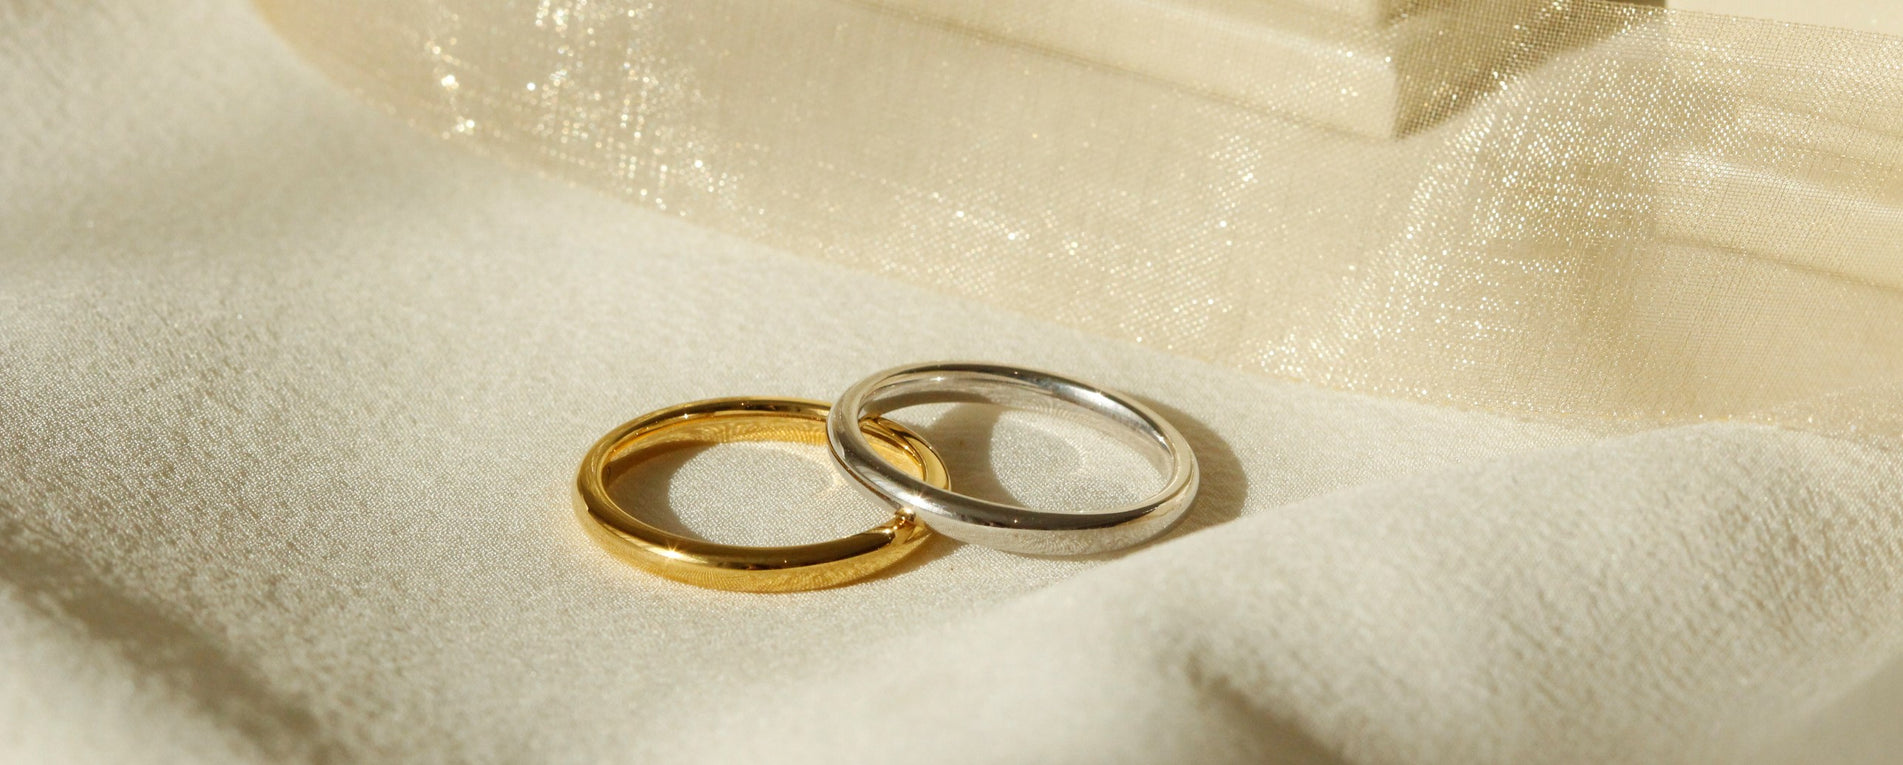 Womens wedding ring set, one in white gold and one in yellow gold in a rounded belini profile